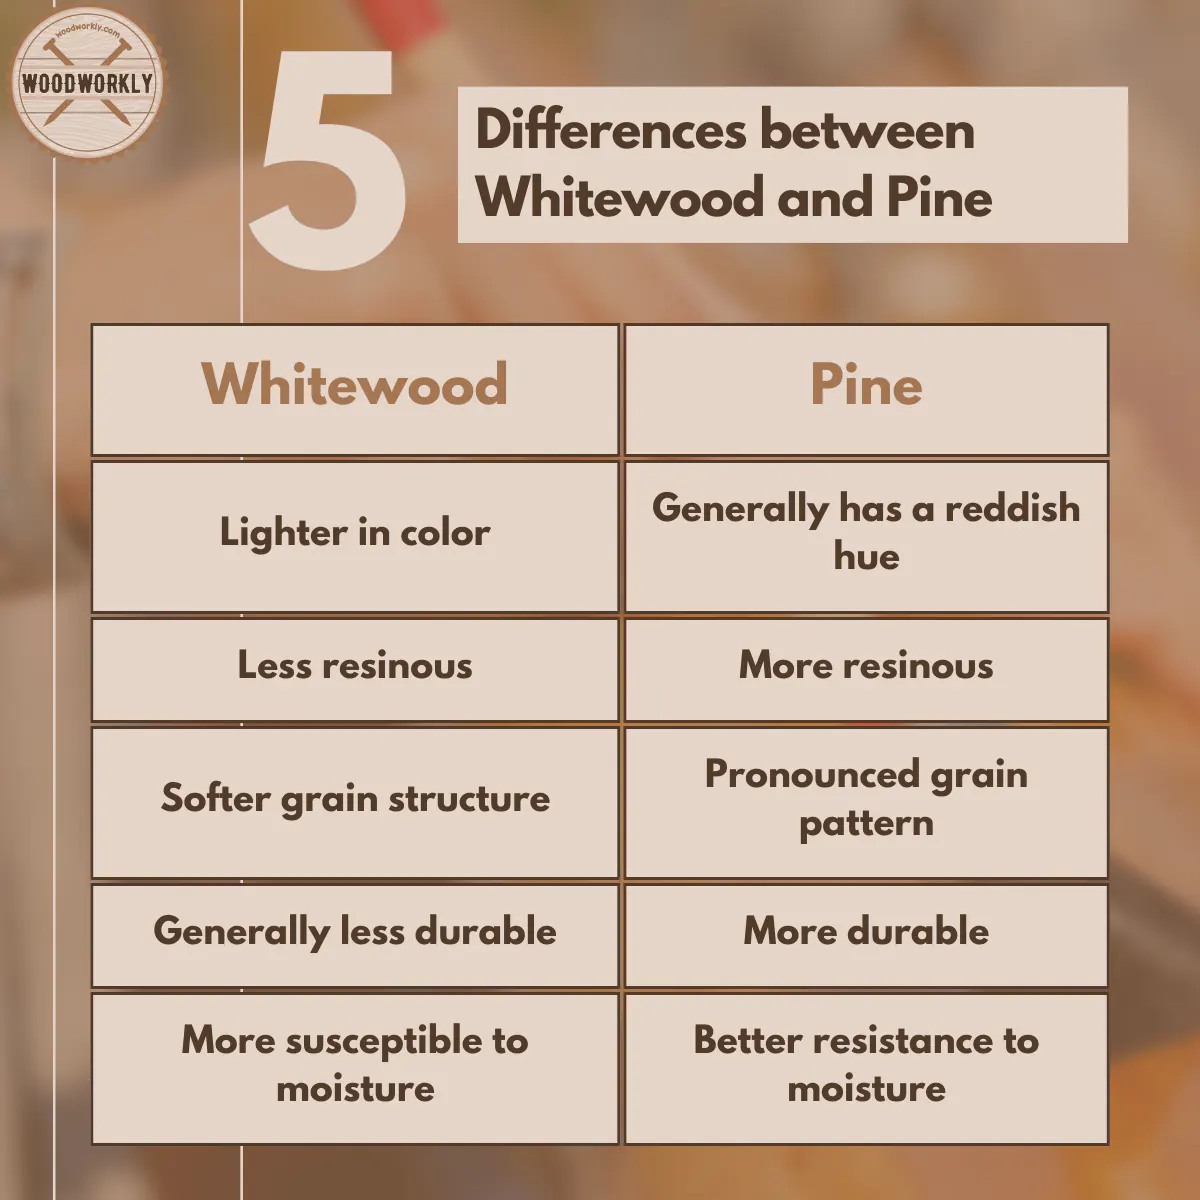 Differences between Whitewood and Pine